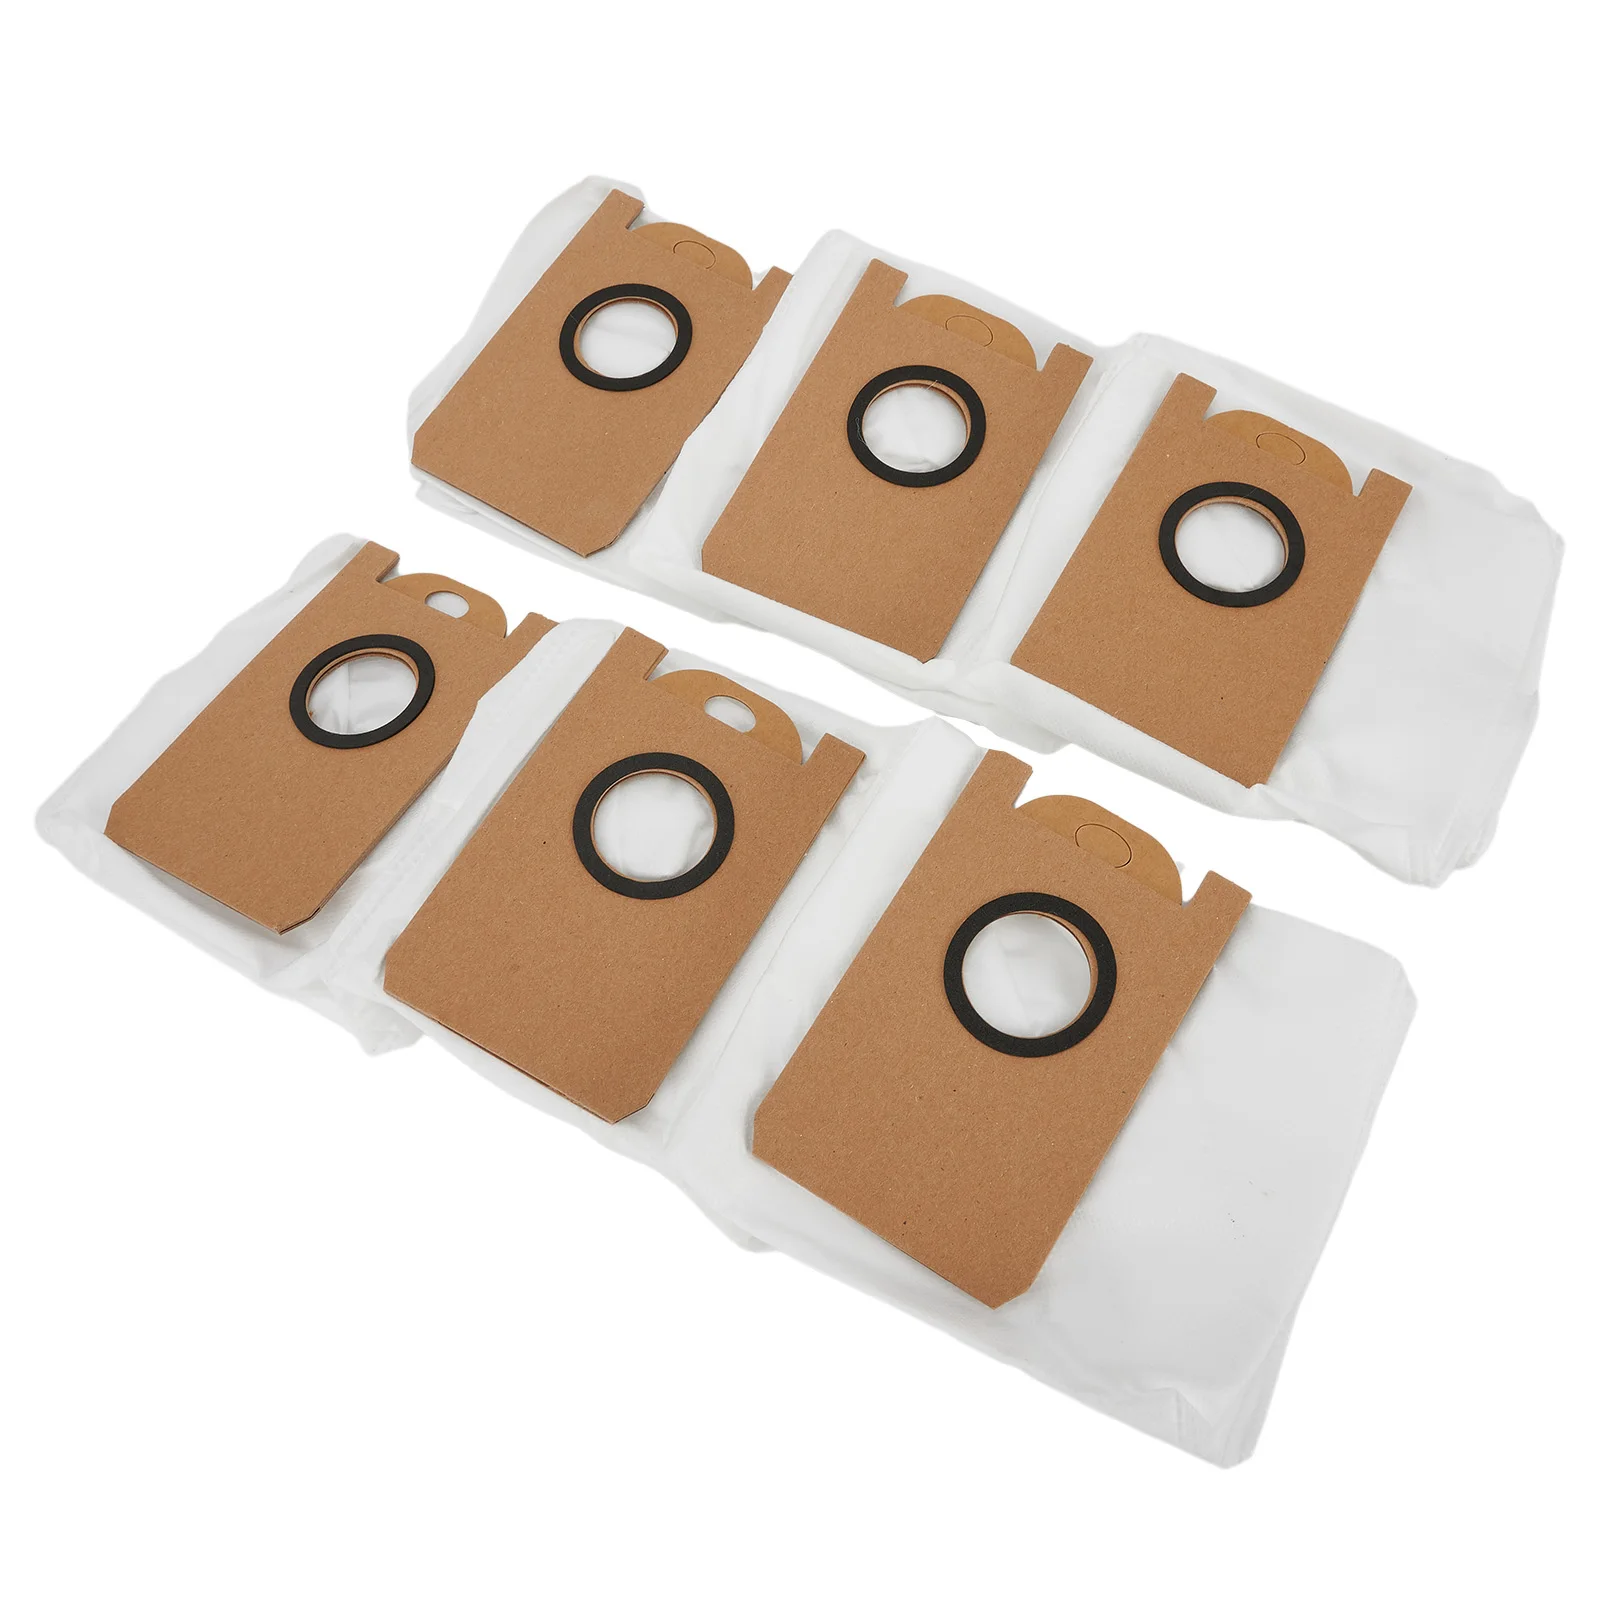 

6PCS Dust Bags Collector Sets For Imou L11/Pro Sweeping Robot Vacuum Cleaner Accessories Spare Parts Home Appliance Replace